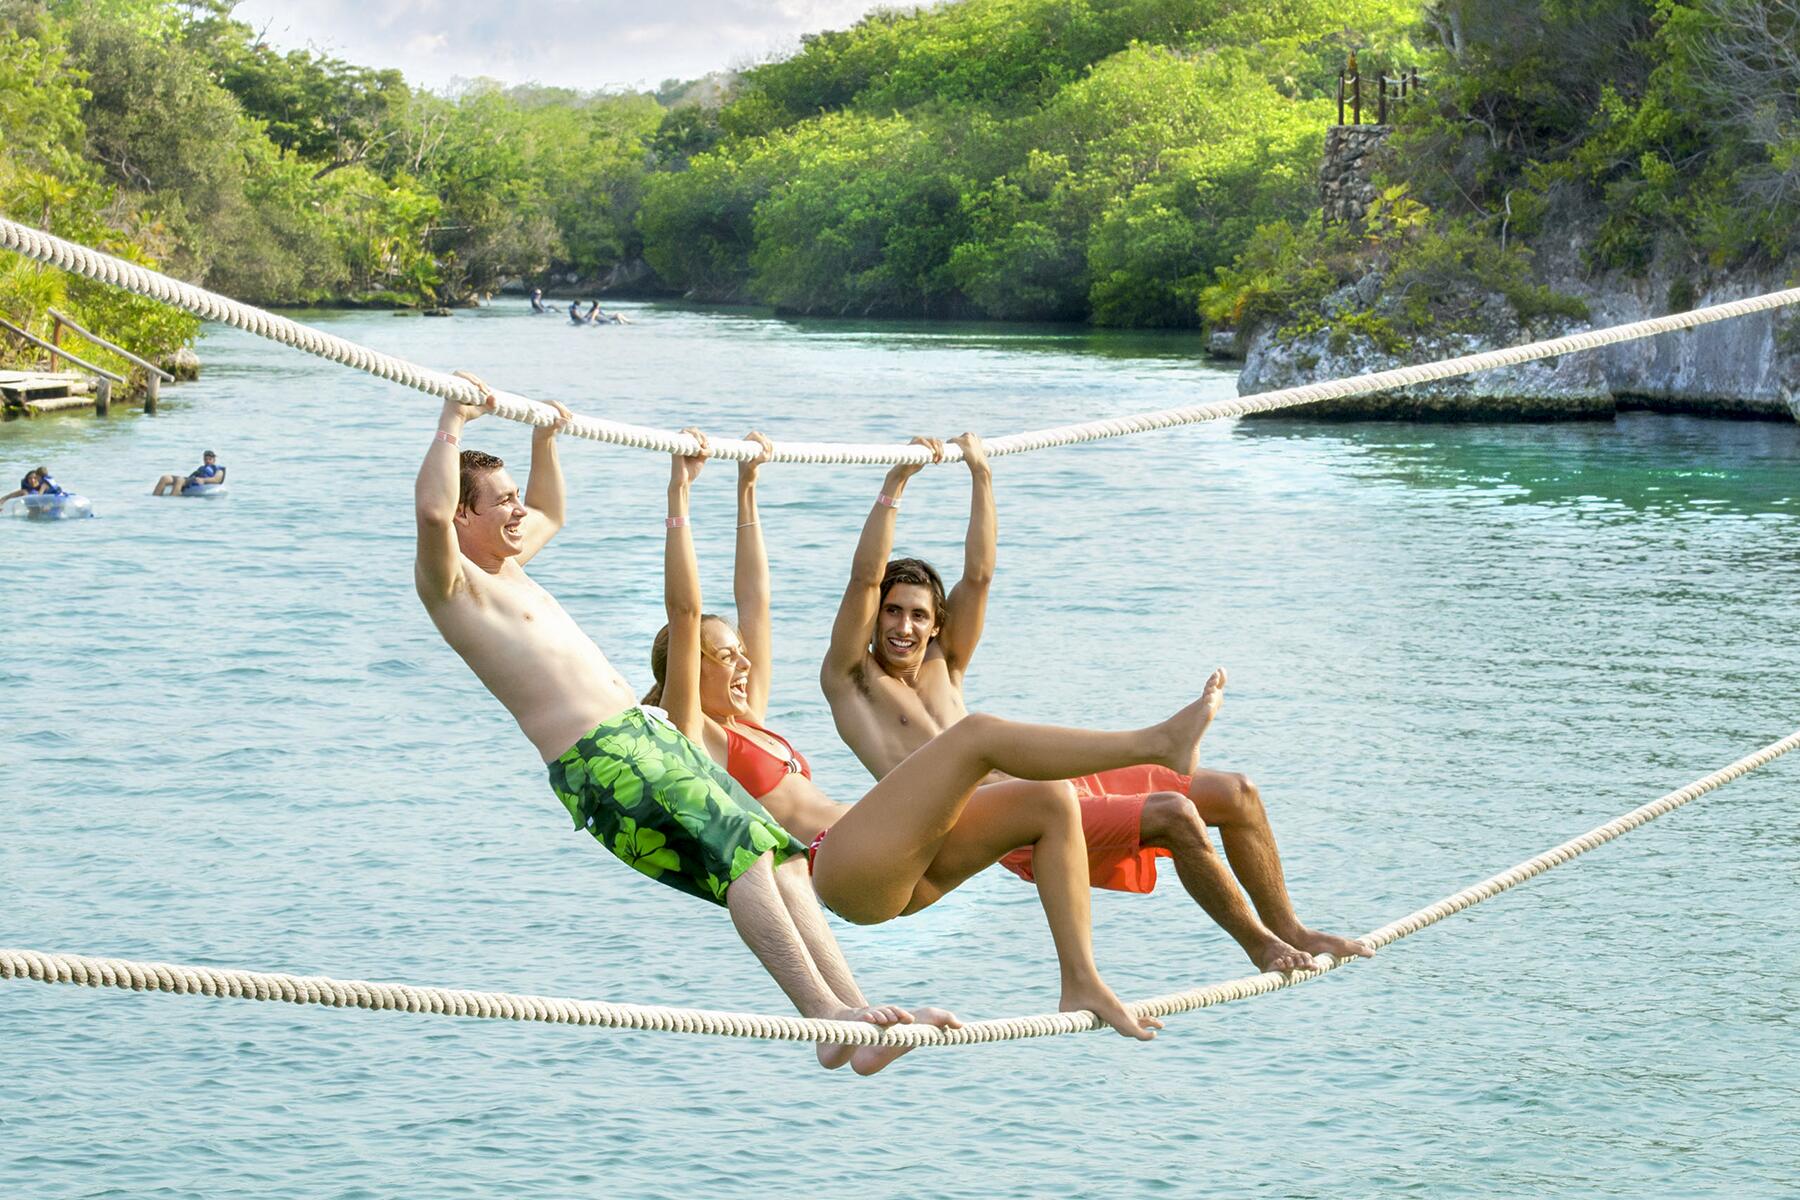 The Trepachanga challenges you to balance between two ropes over water_courtesy Grupo Xcaret